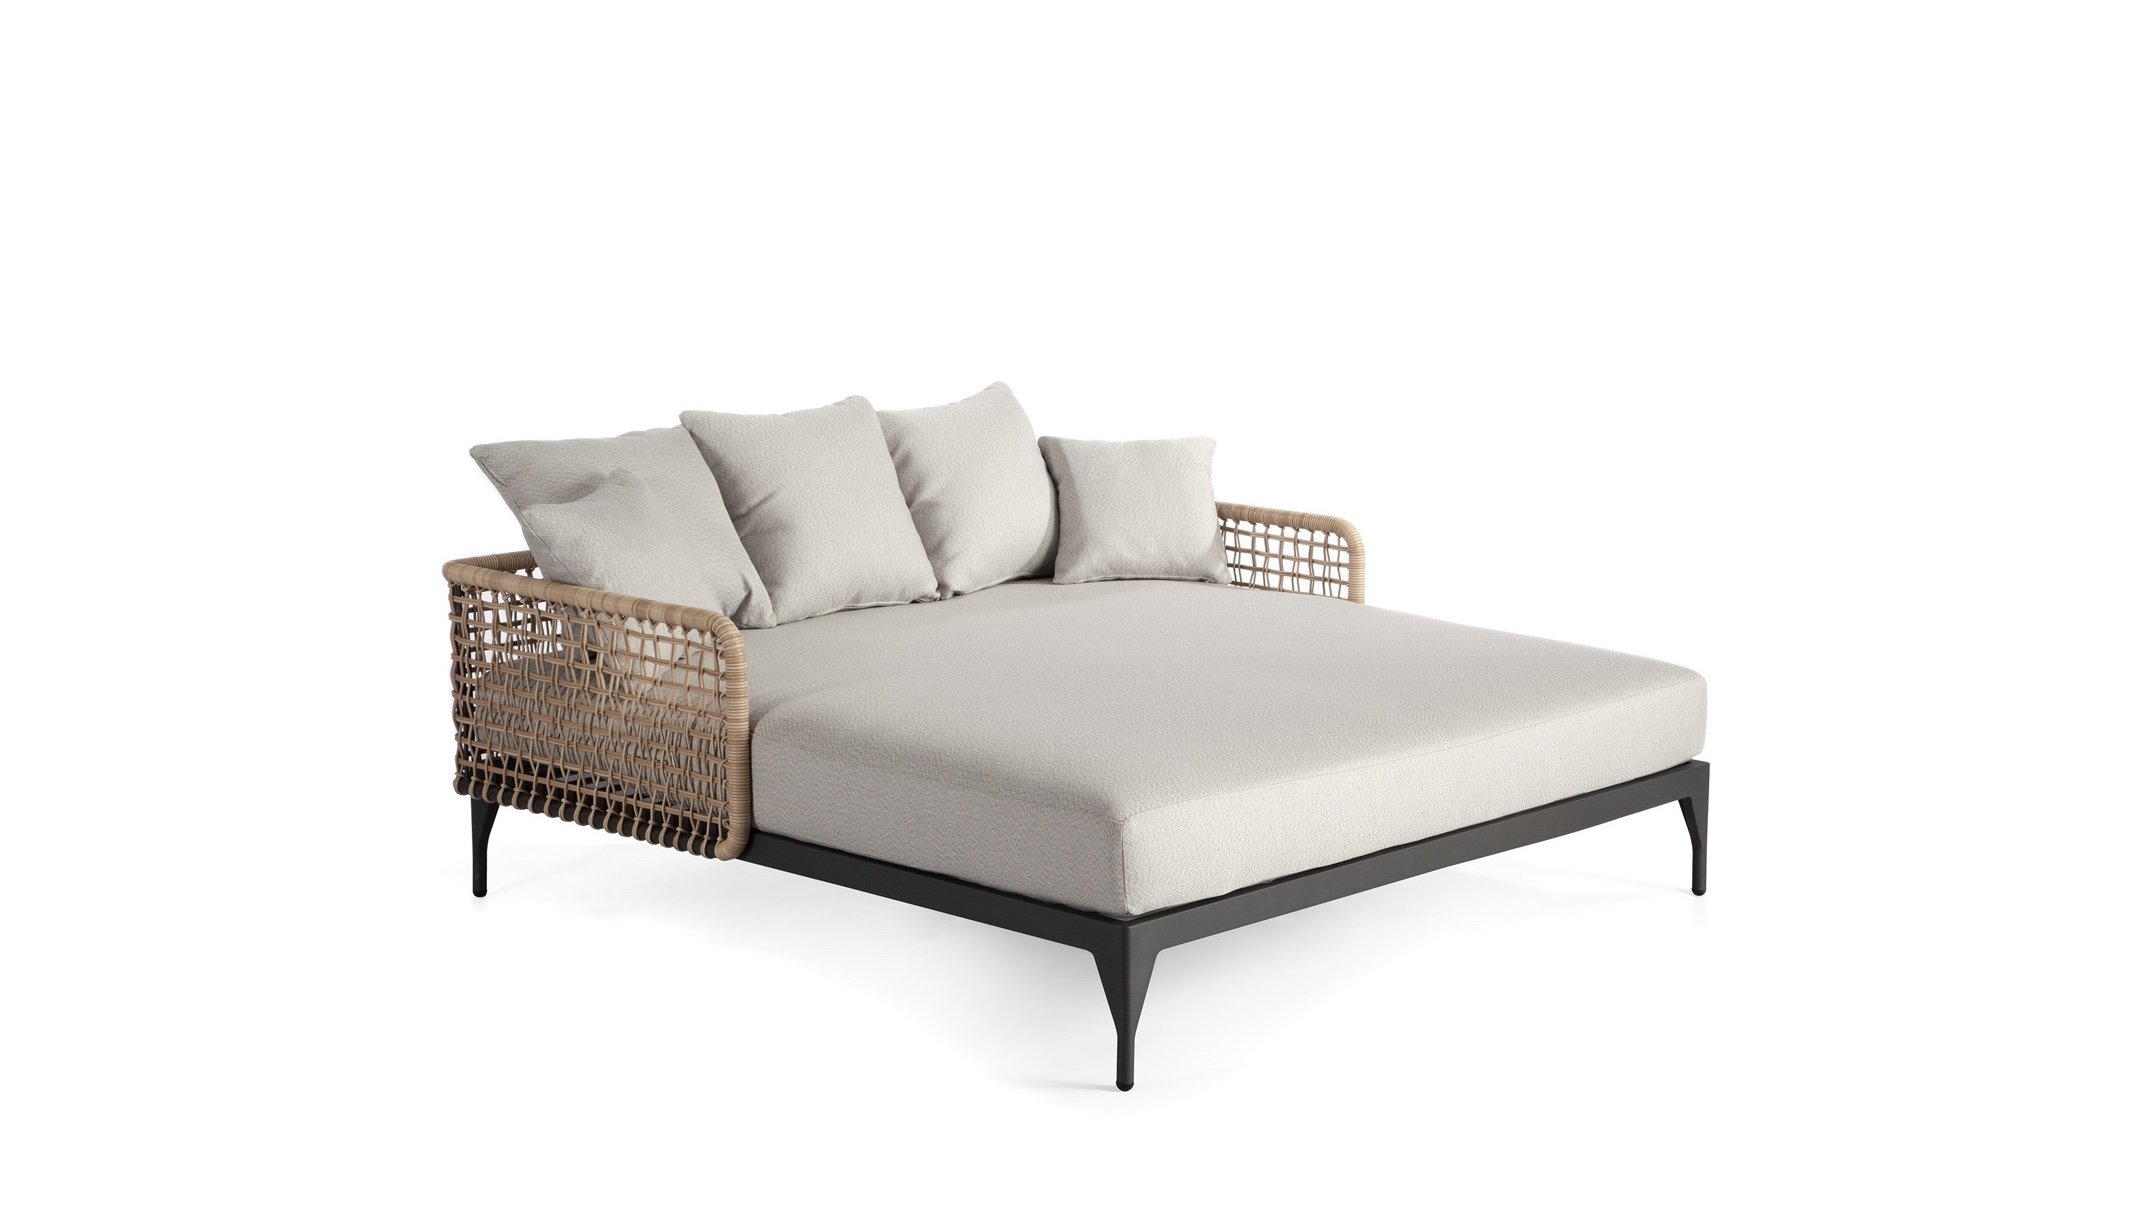 MADEIRA Daybed